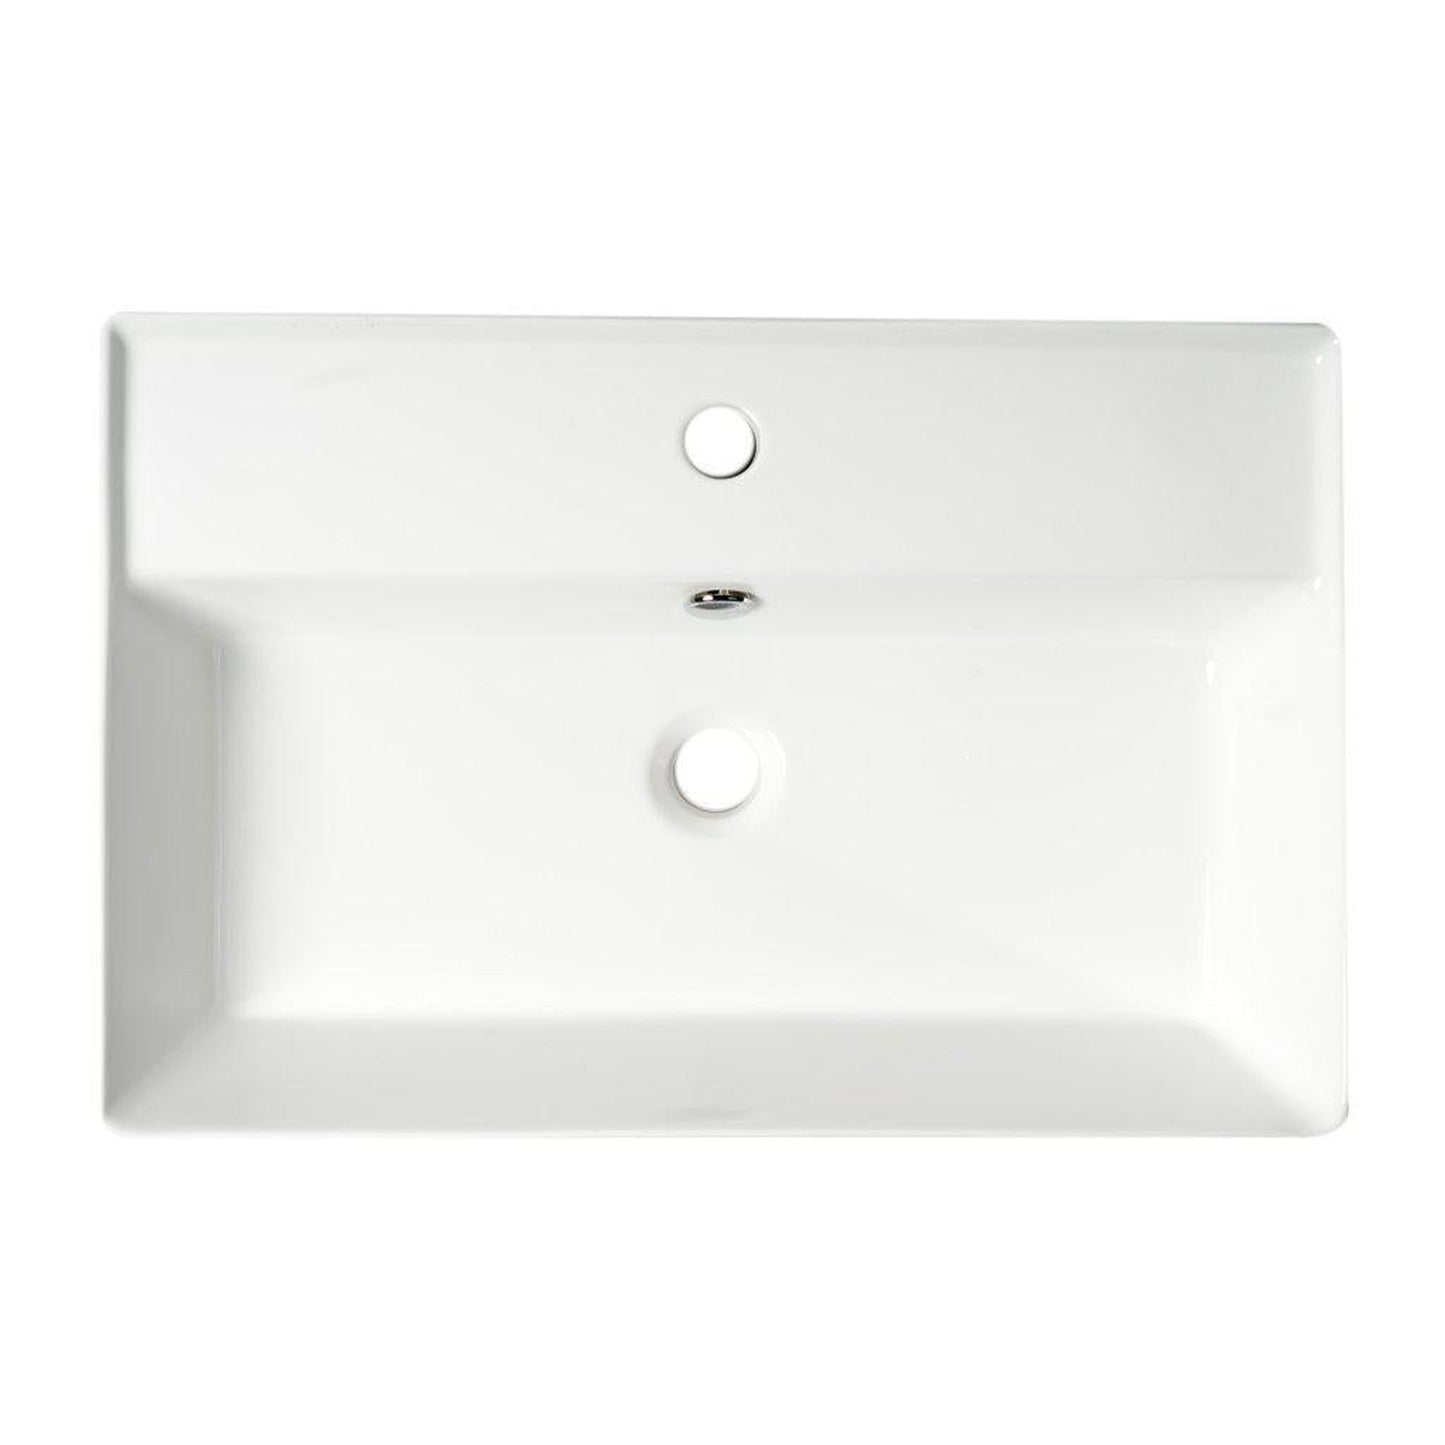 ALFI Brand ABC901-W 24" White Above Mount Rectangle Ceramic Bathroom Sink With Single Faucet Hole and Overflow